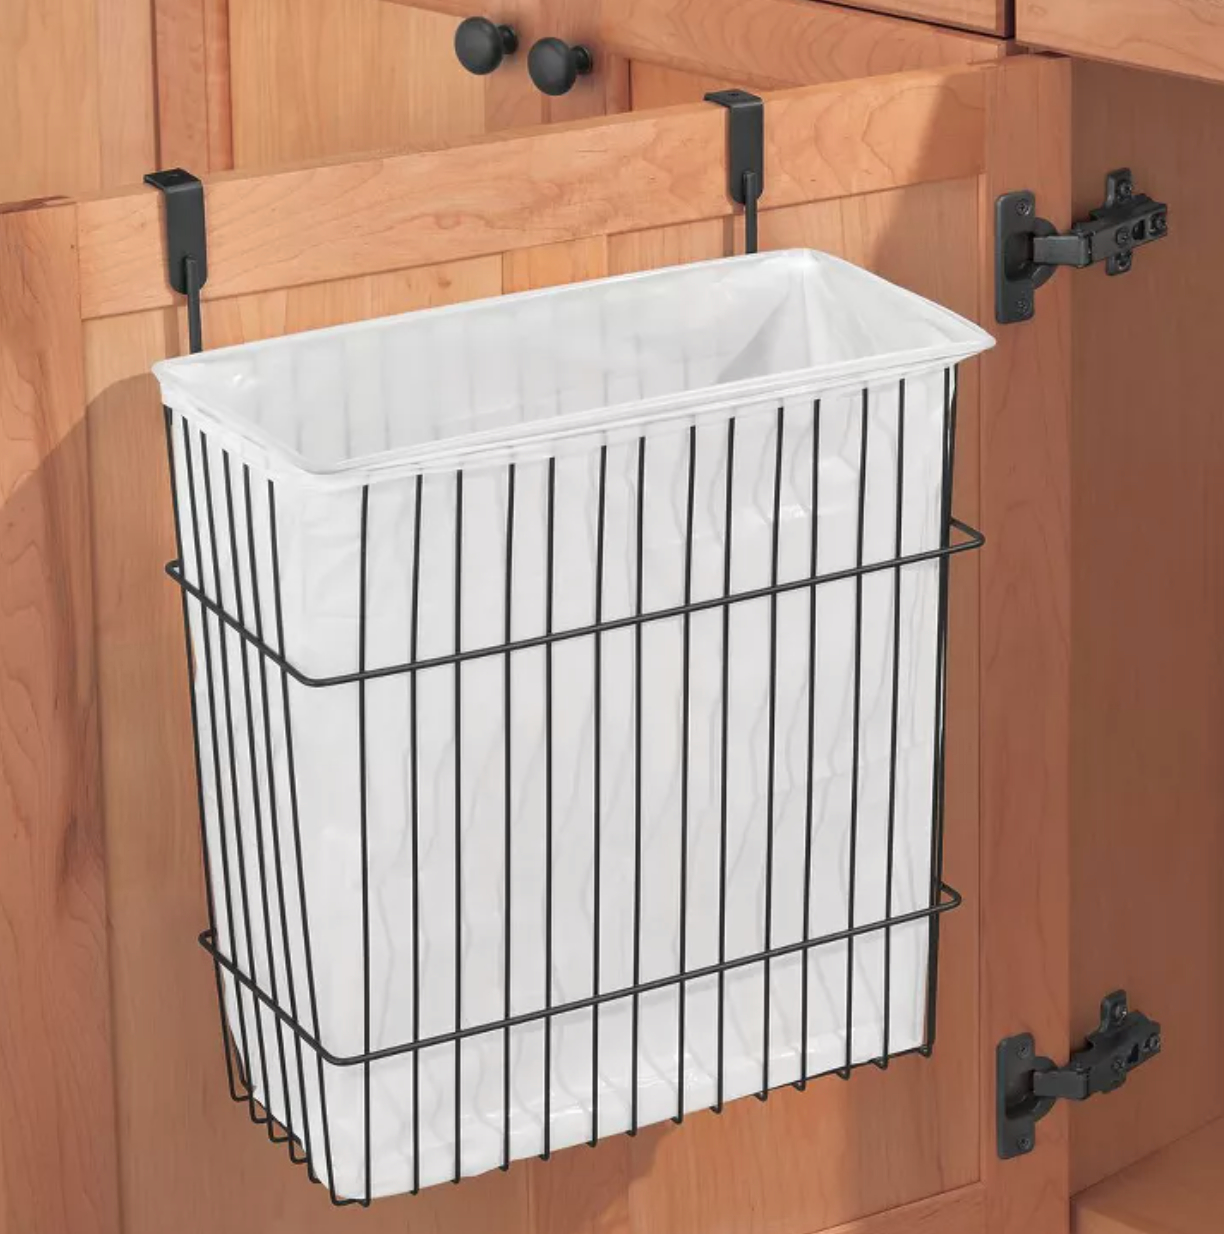 a wire basket filled with a plastic bag for trash hanging over a cabinet door